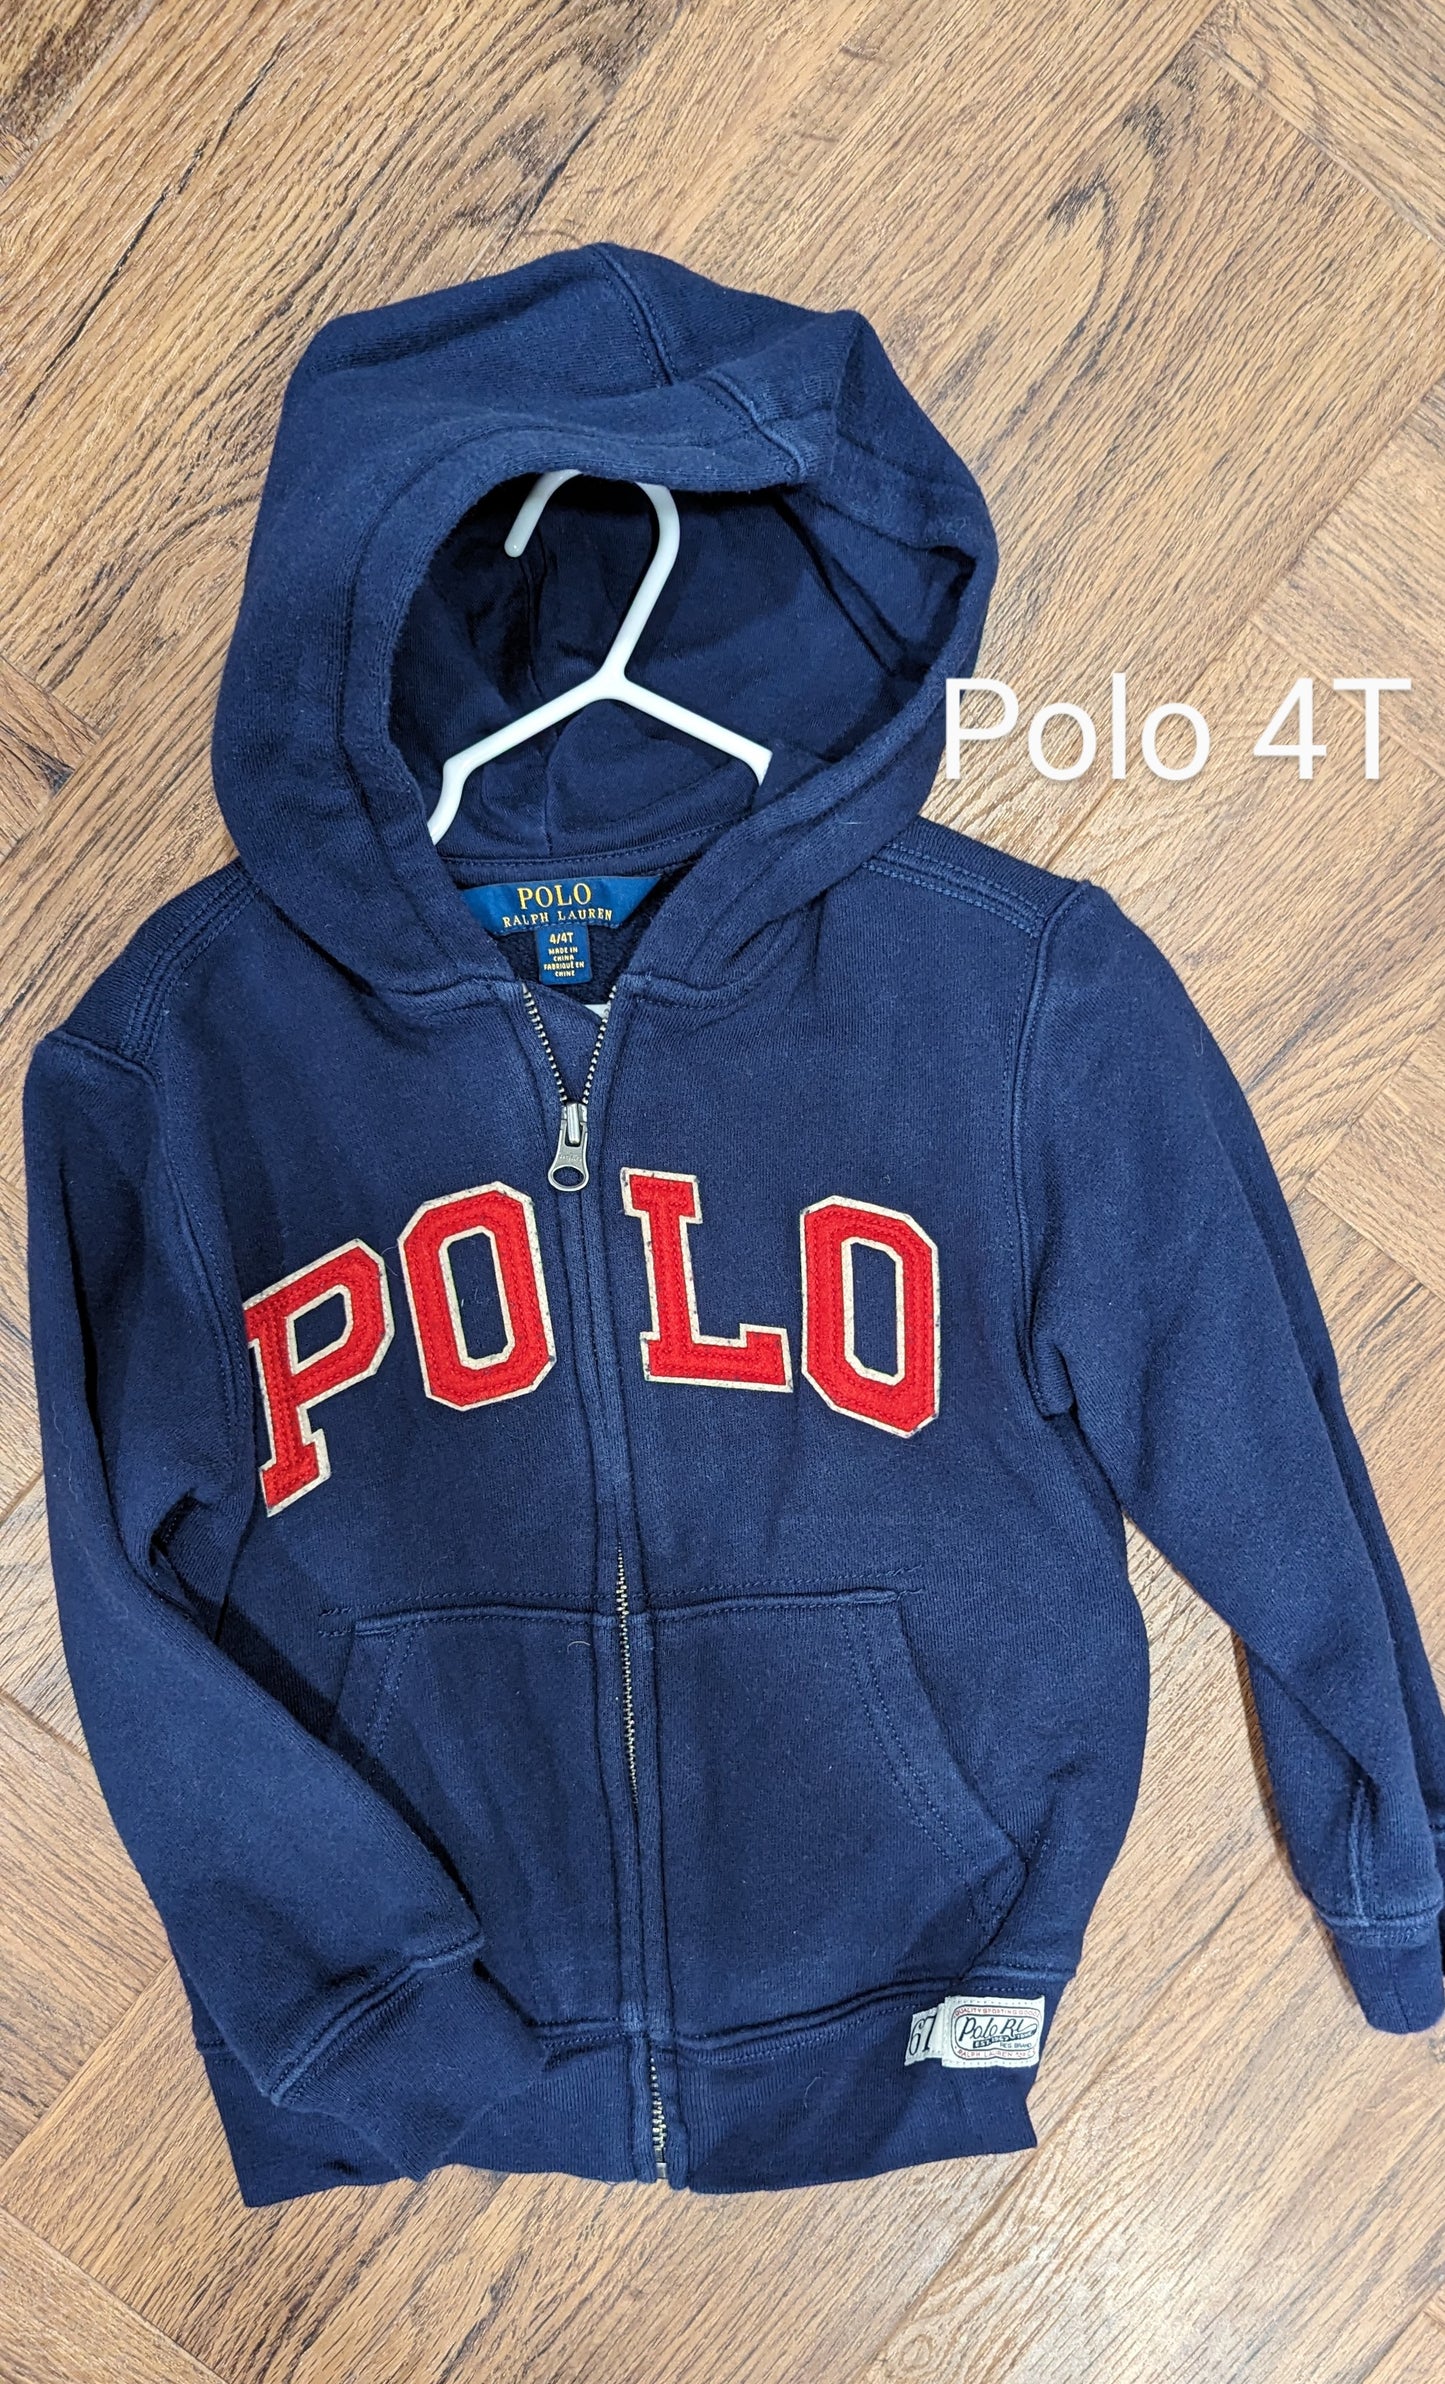 4T Polo Blue zip up hoodie